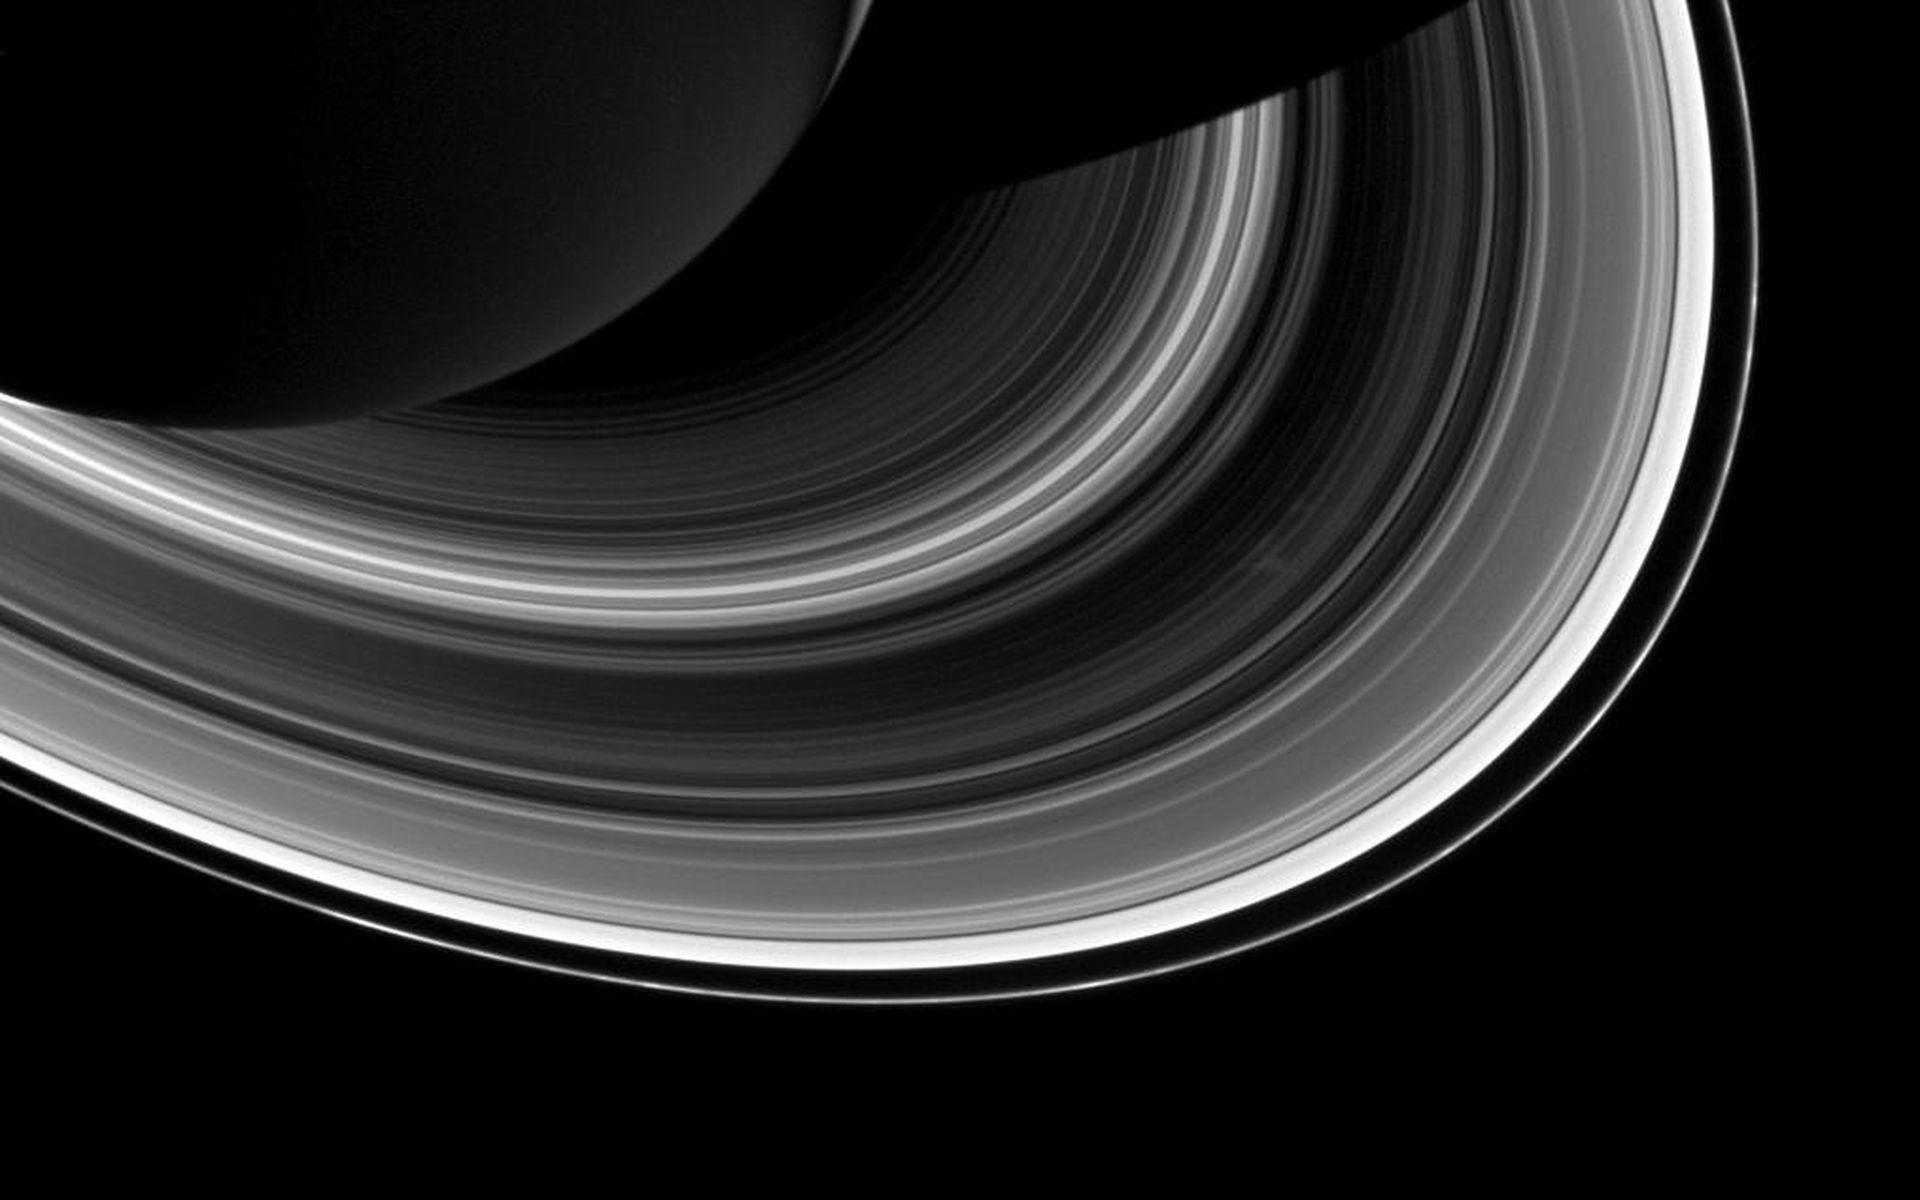 Space Image. Shadows and Rings